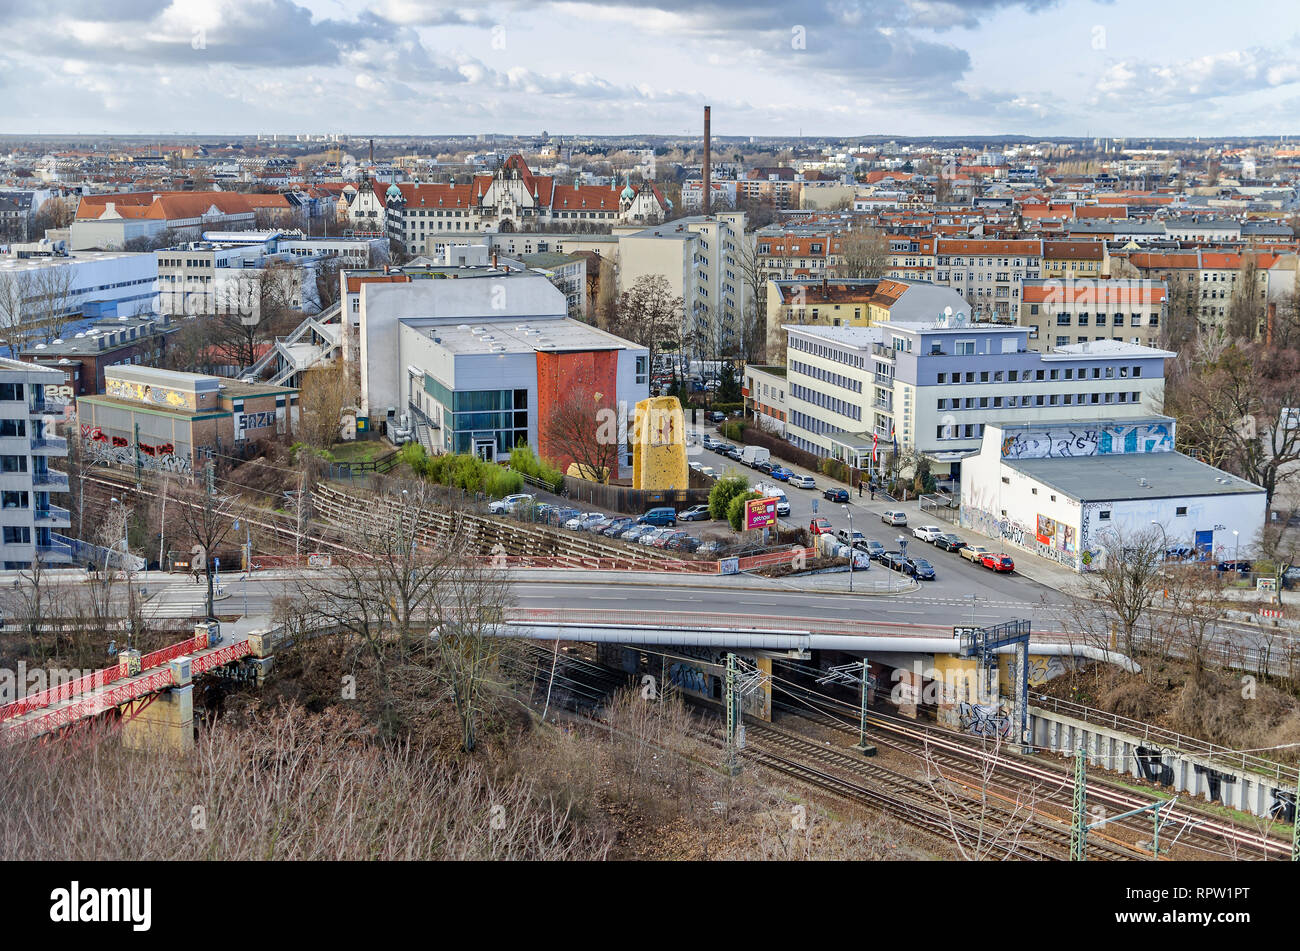 Berlin, Germany - February 11, 2019: View from the Flak tower Humboldthain over the district Gesundbrunnen with the Humboldsteg, Boettgerstrasse Stock Photo